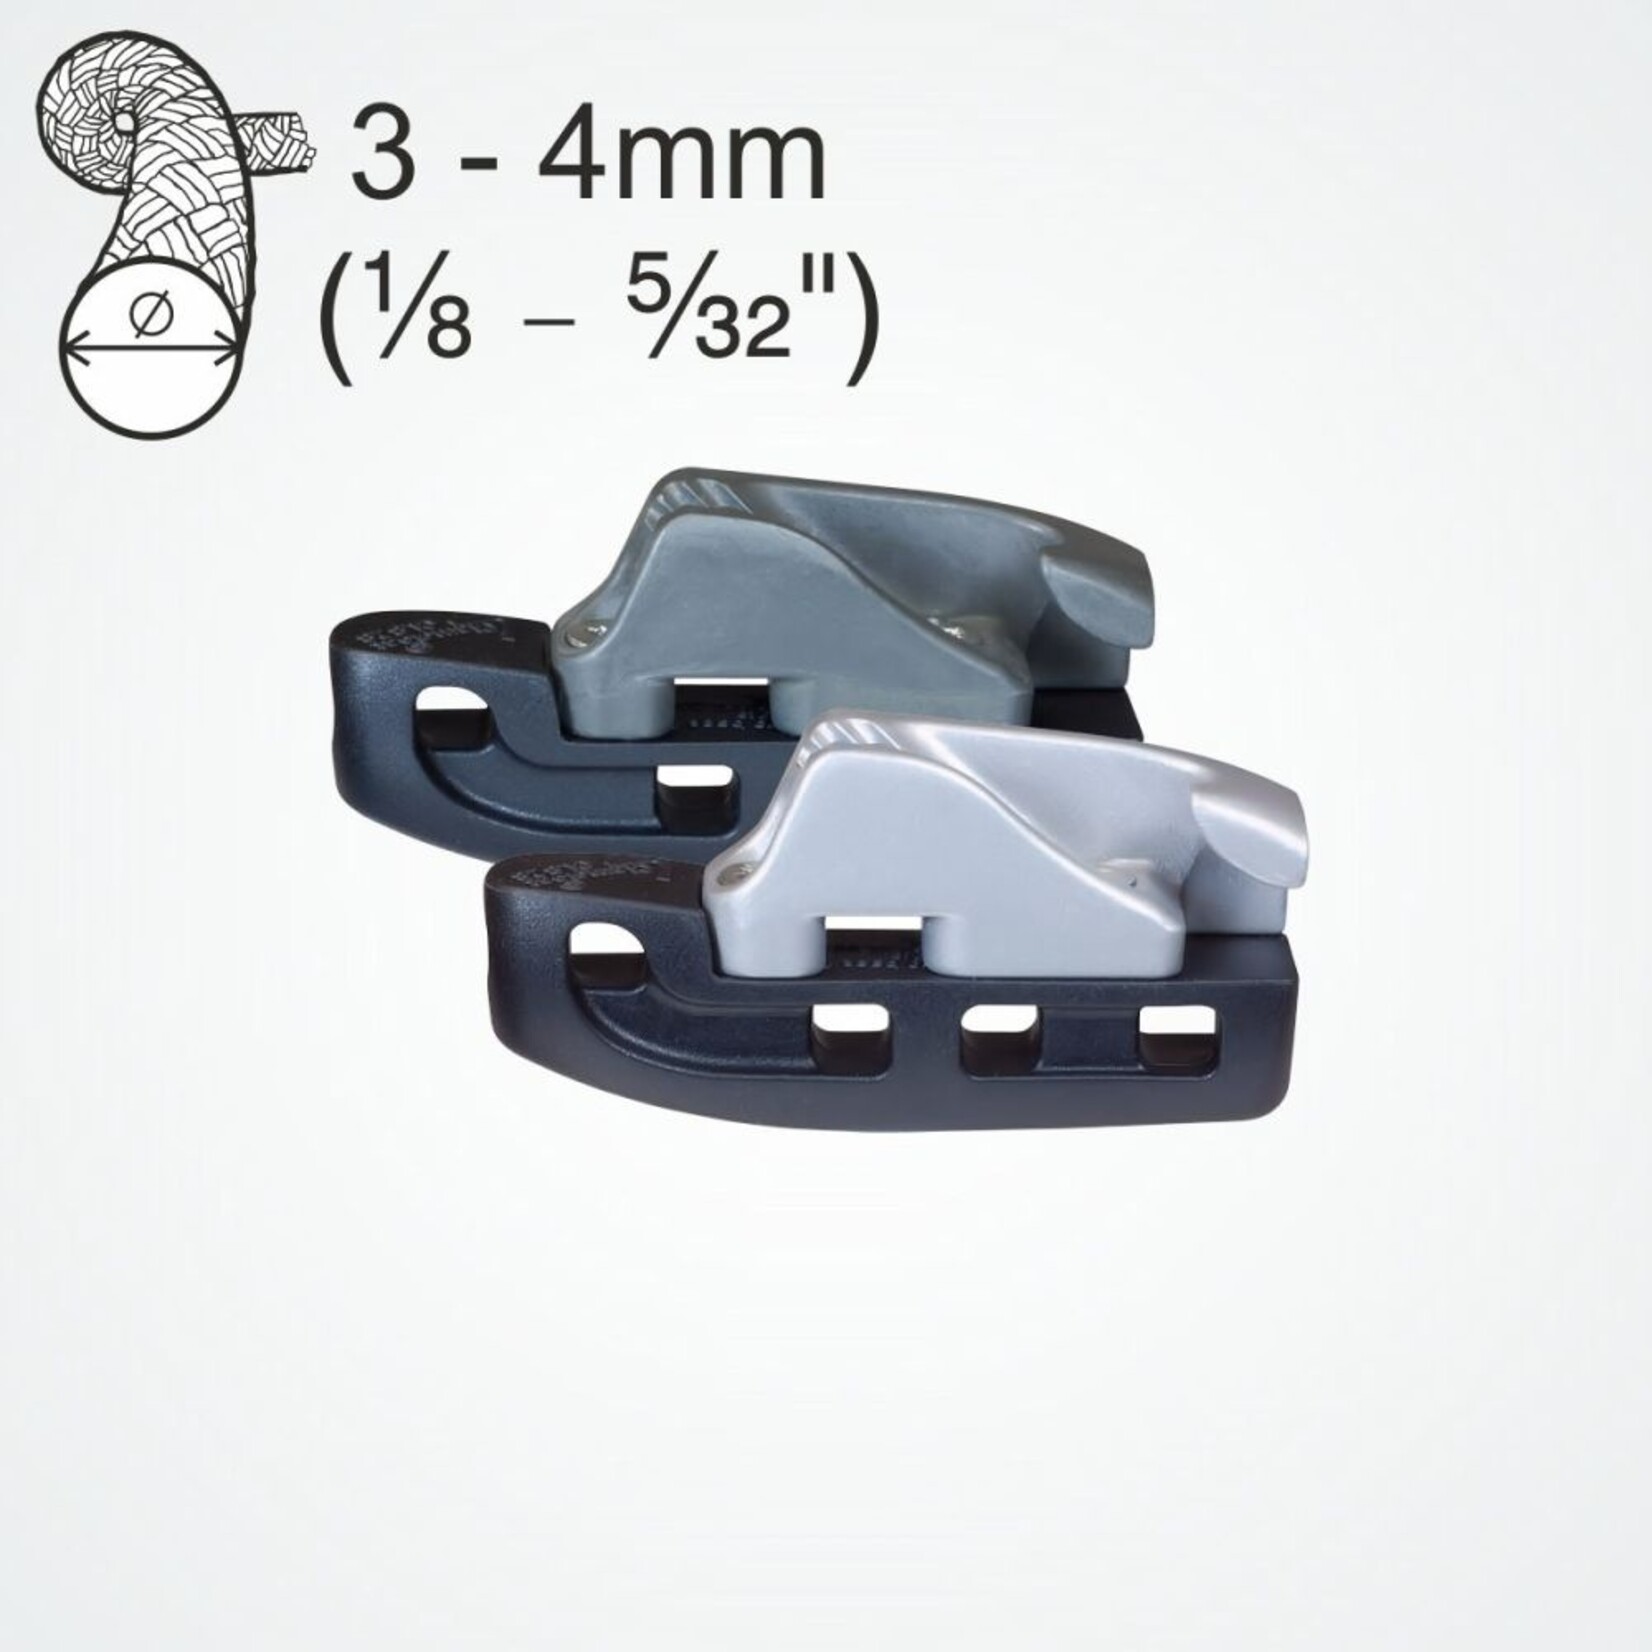 Clamcleat Aero Base with zilver CL277 Side-Entry Racing Micros (Starboard)